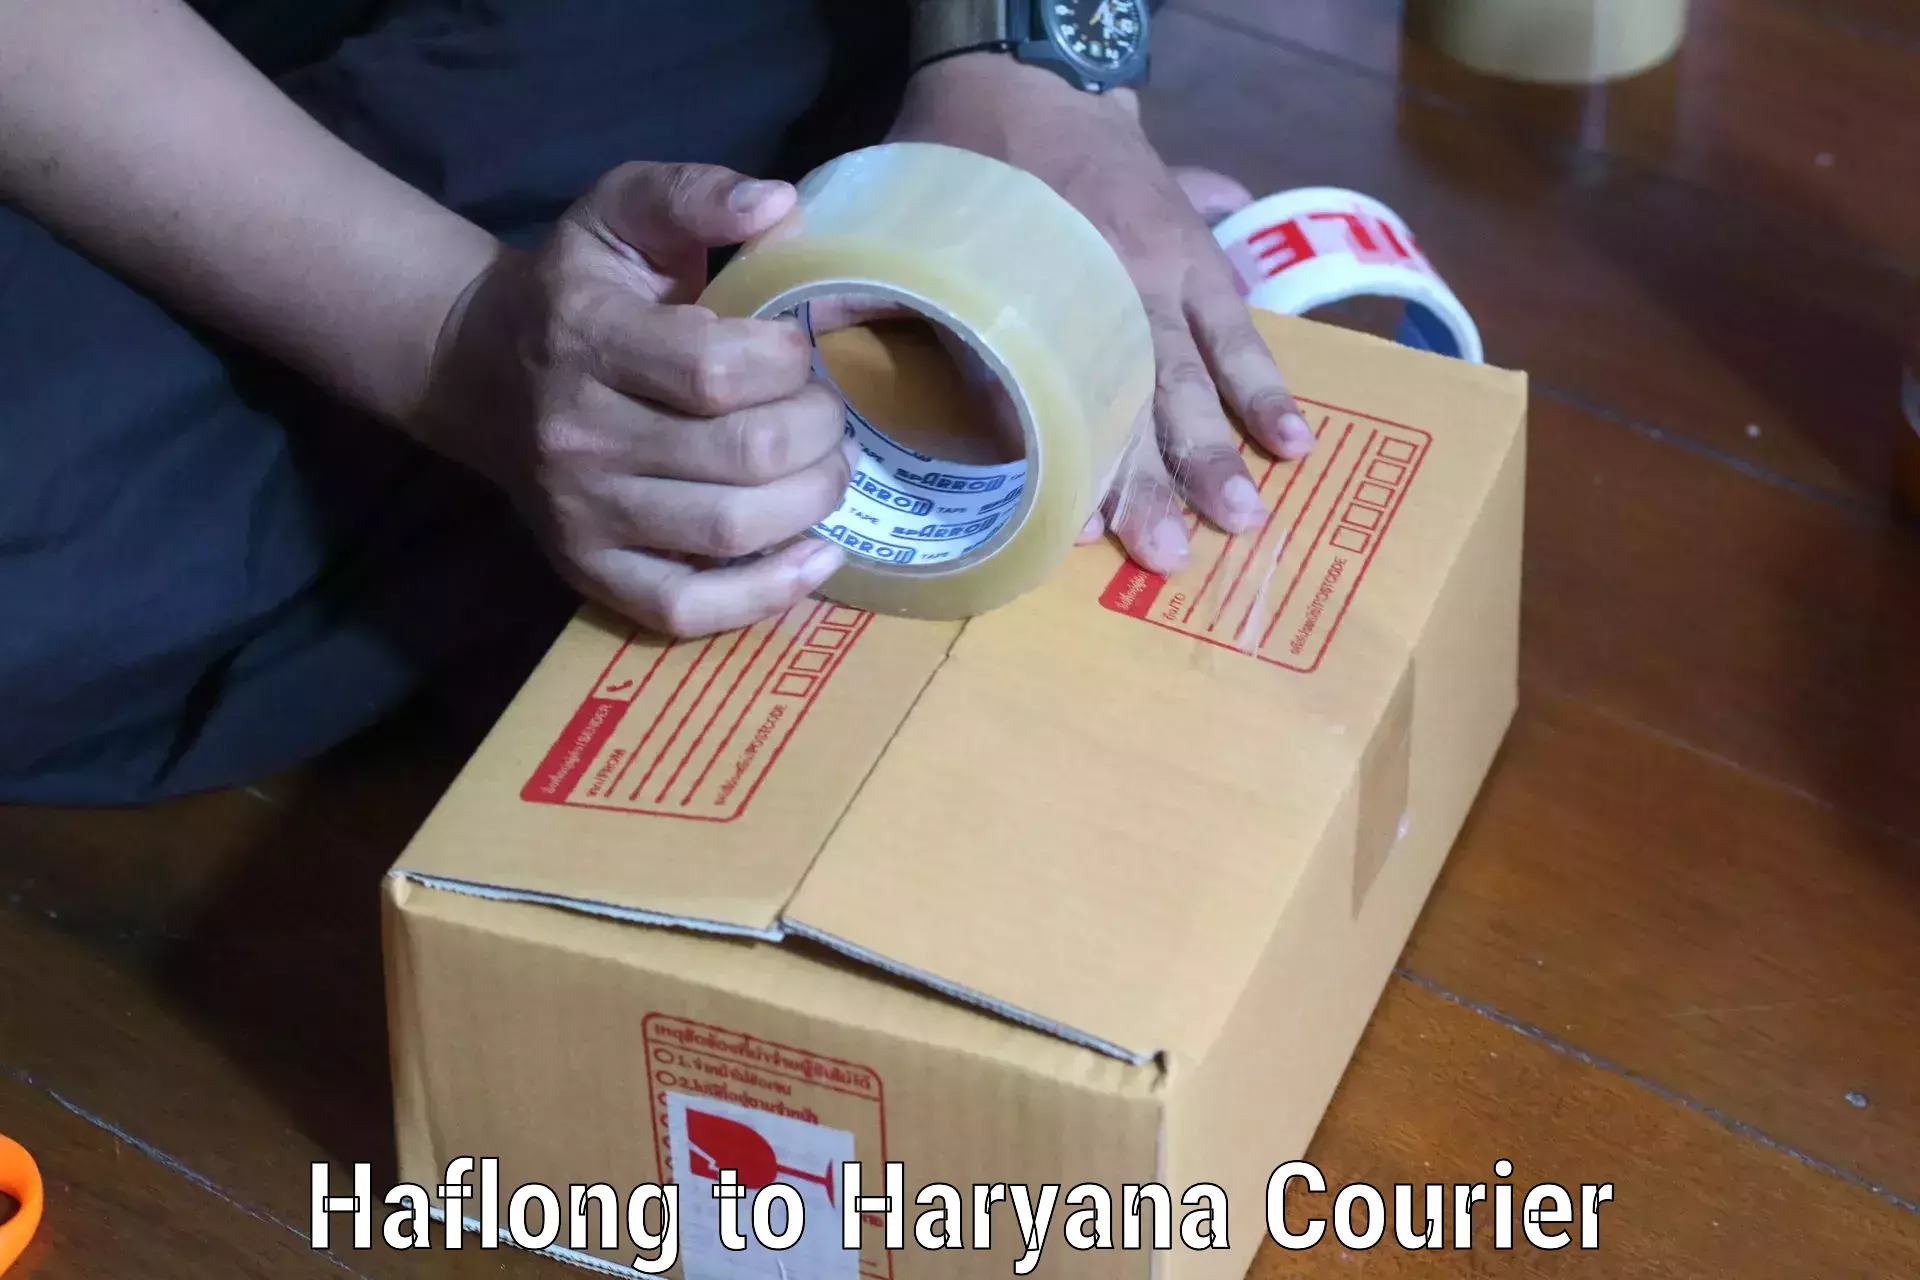 Parcel handling and care Haflong to Dharuhera